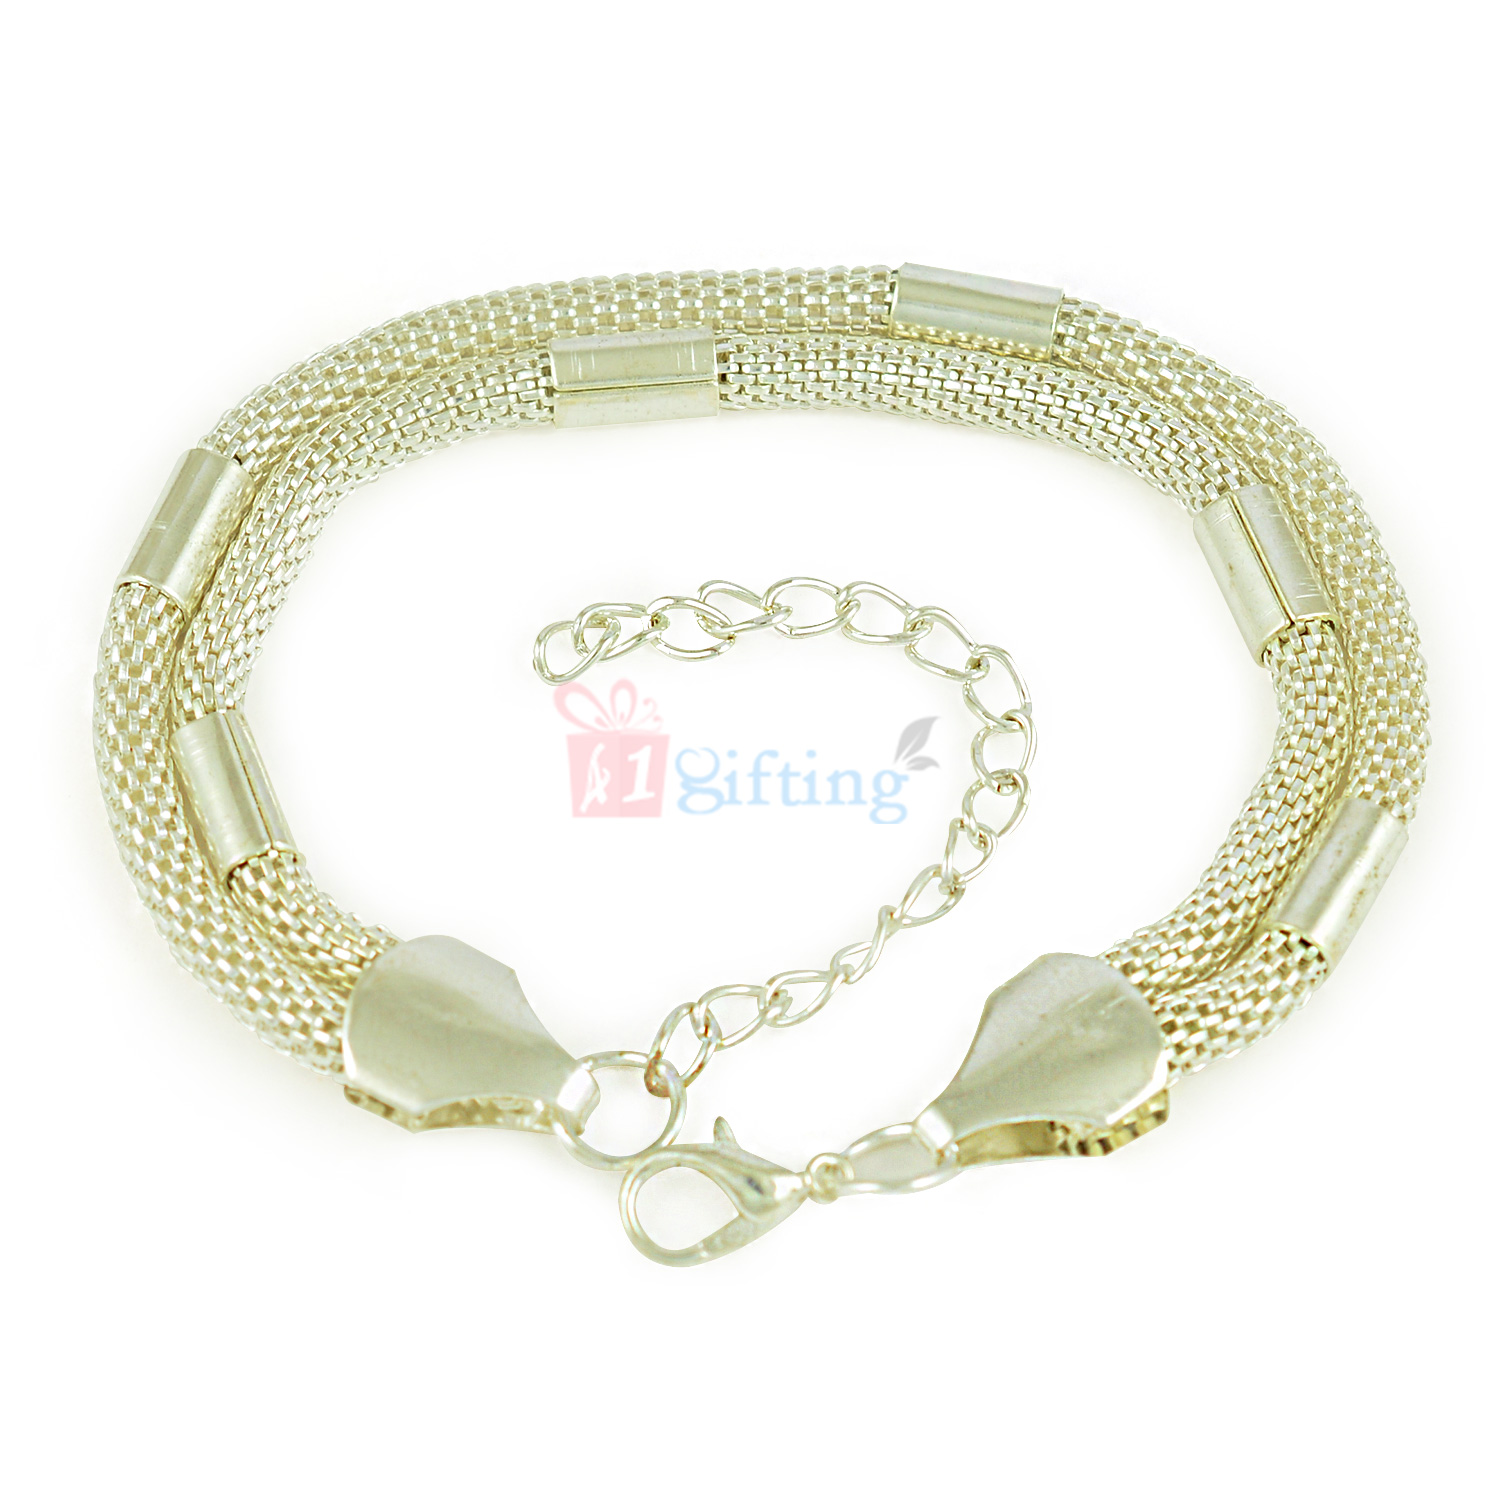 Latticed Double Piped Roll Silver Bracelet